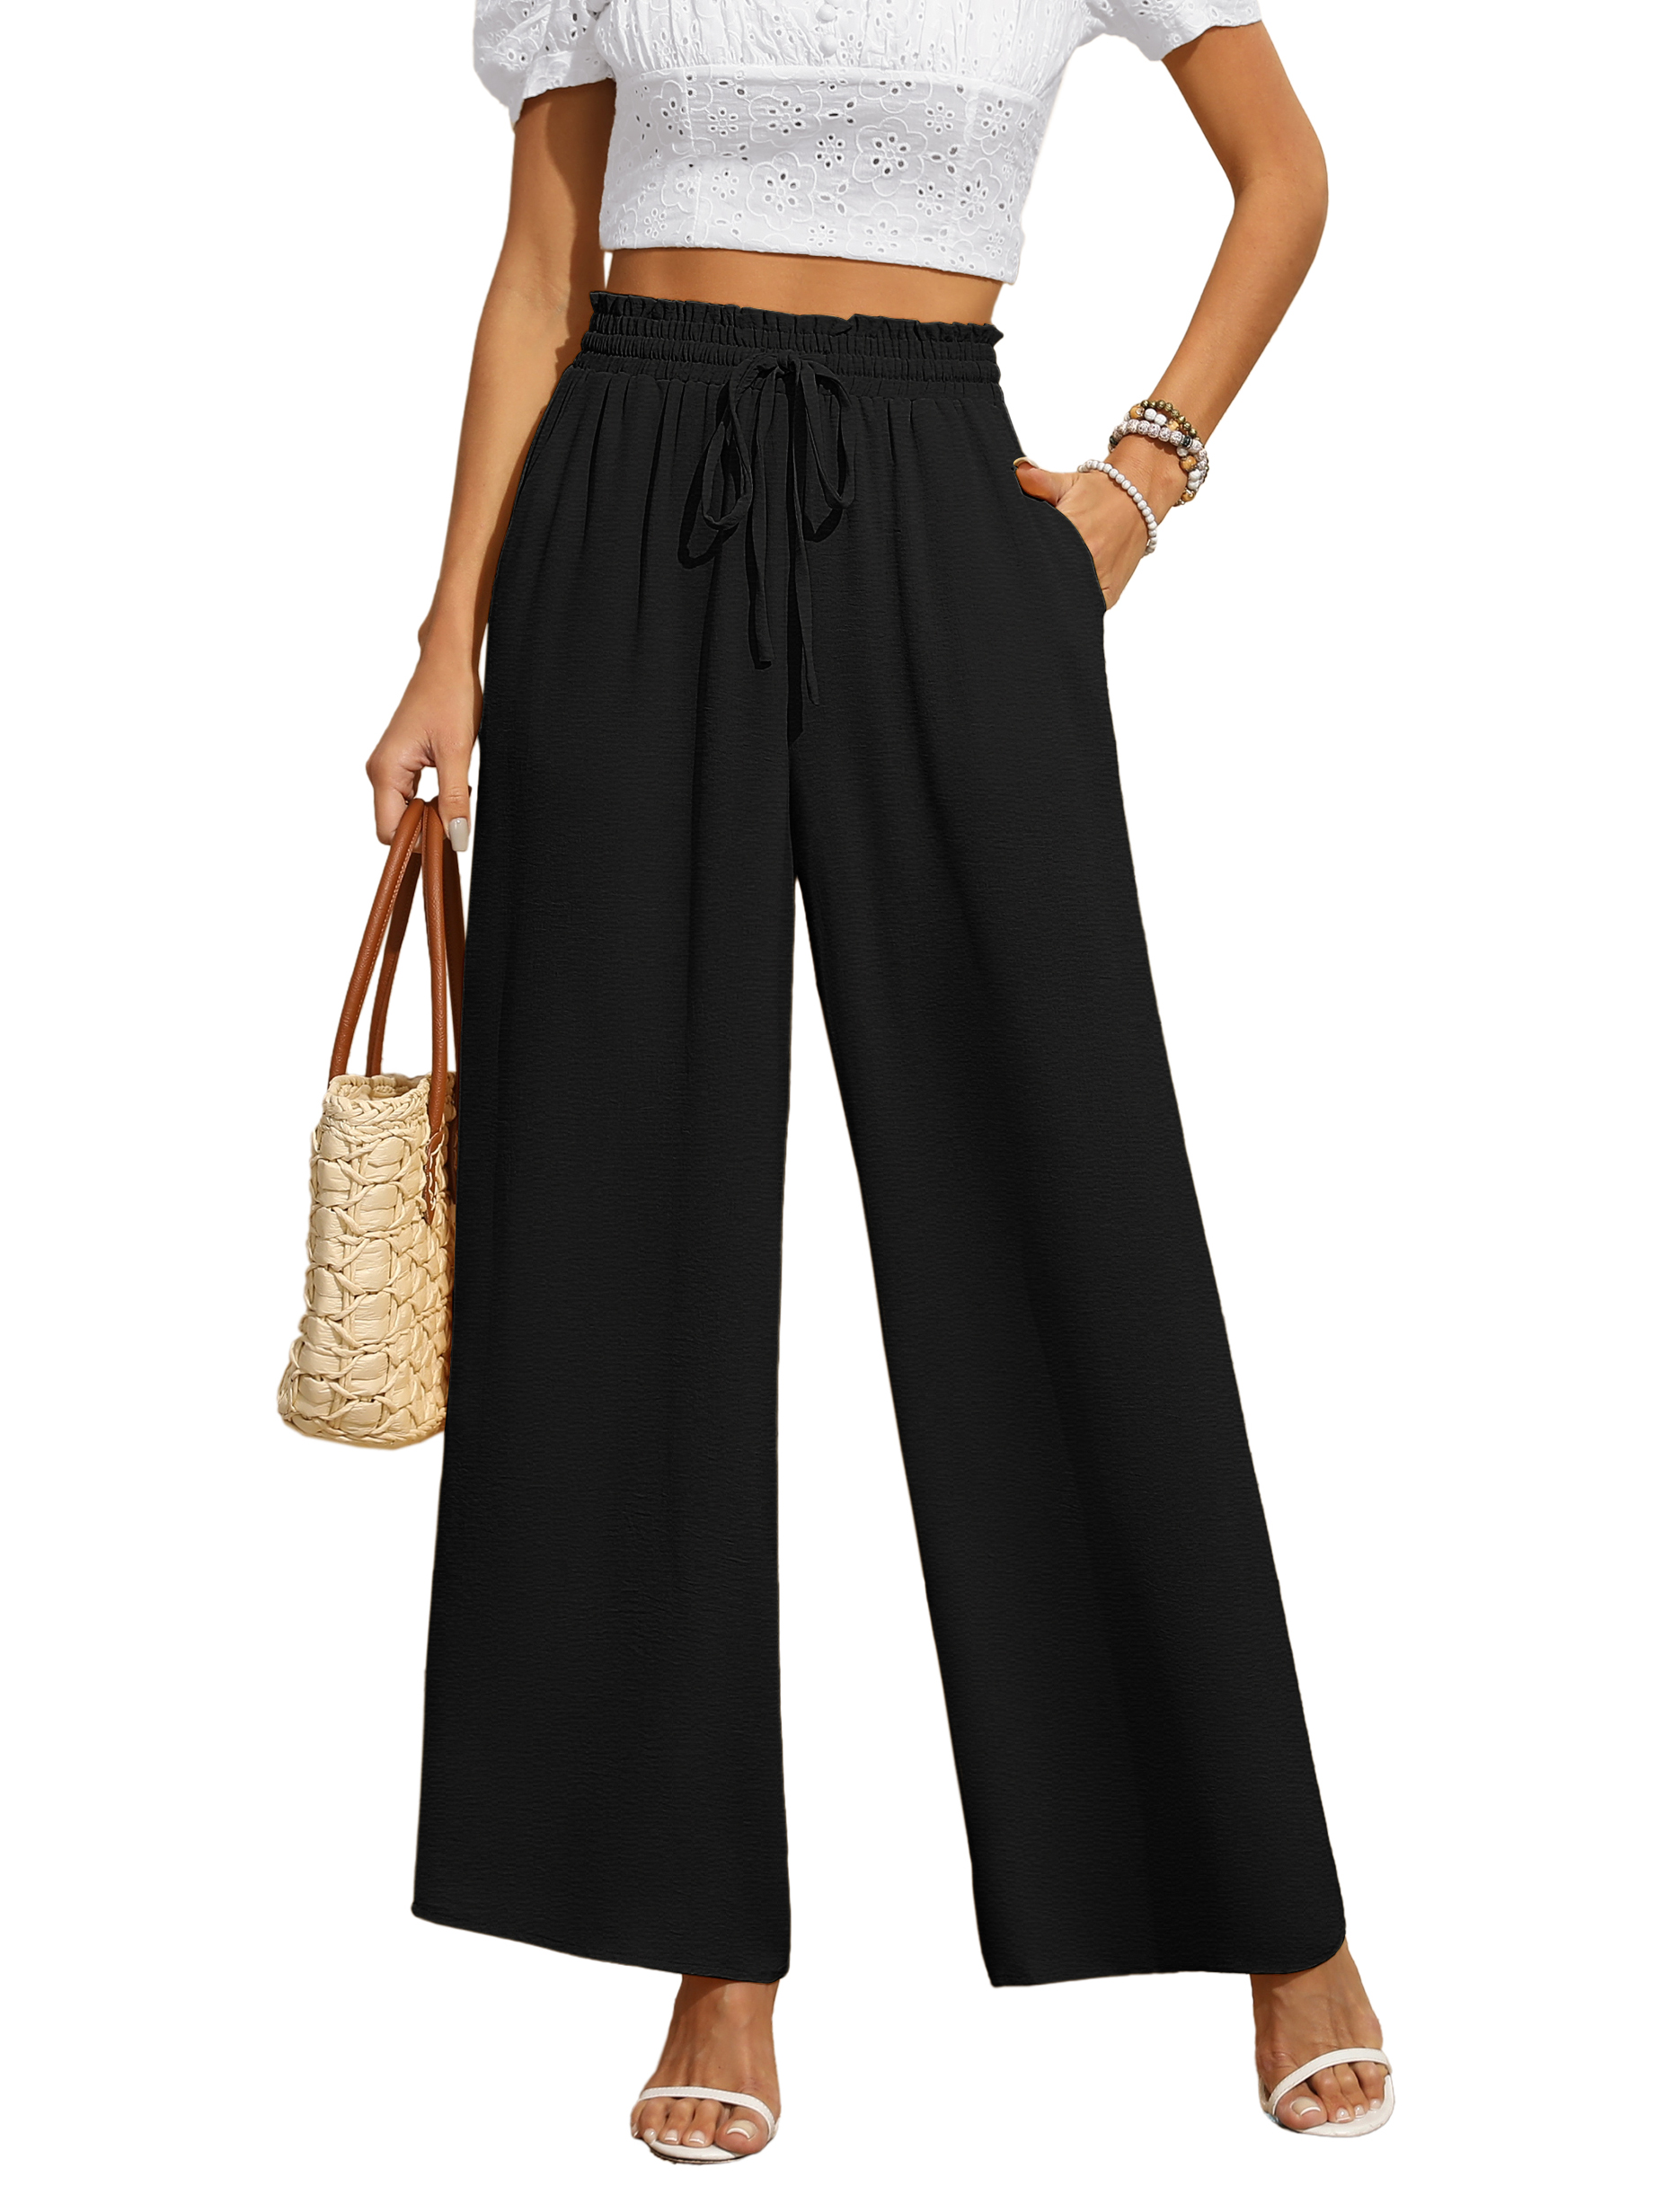 Lounge Pants for Women Summer Casual Loose Fitting Solid Color Comfy ...